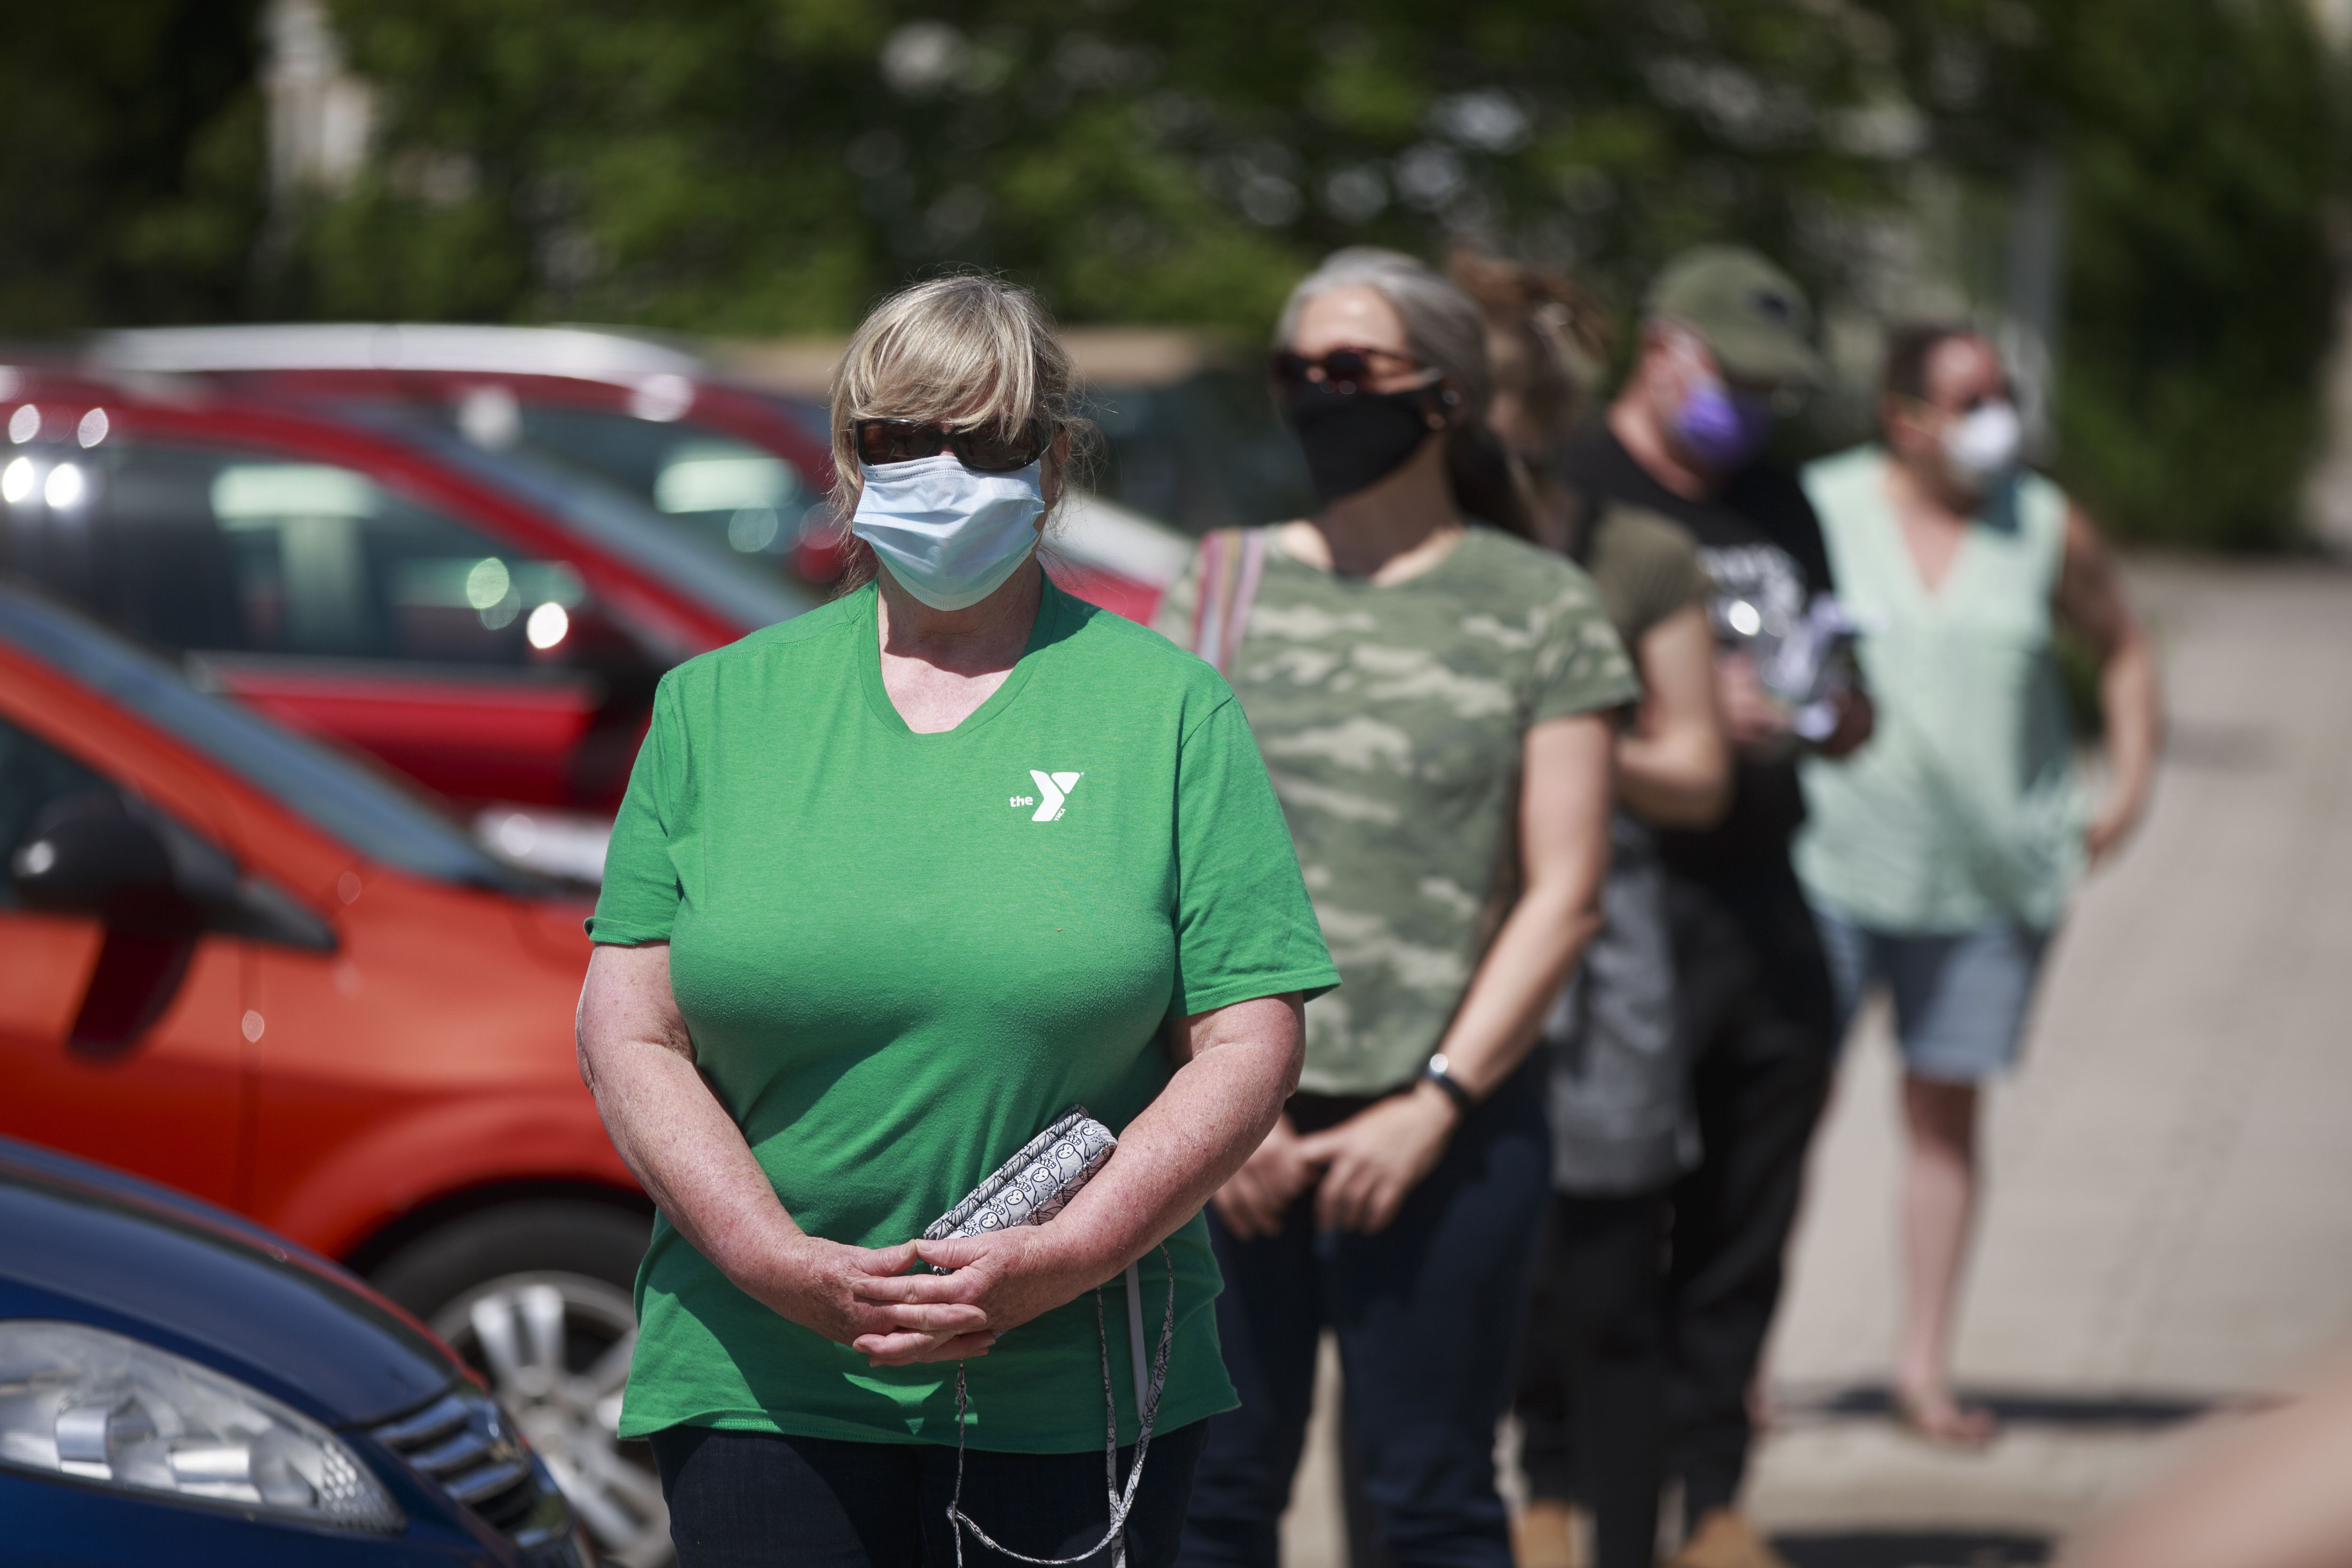 A woman stands at the front of a line of voters in a parking lot. All are wearing face masks